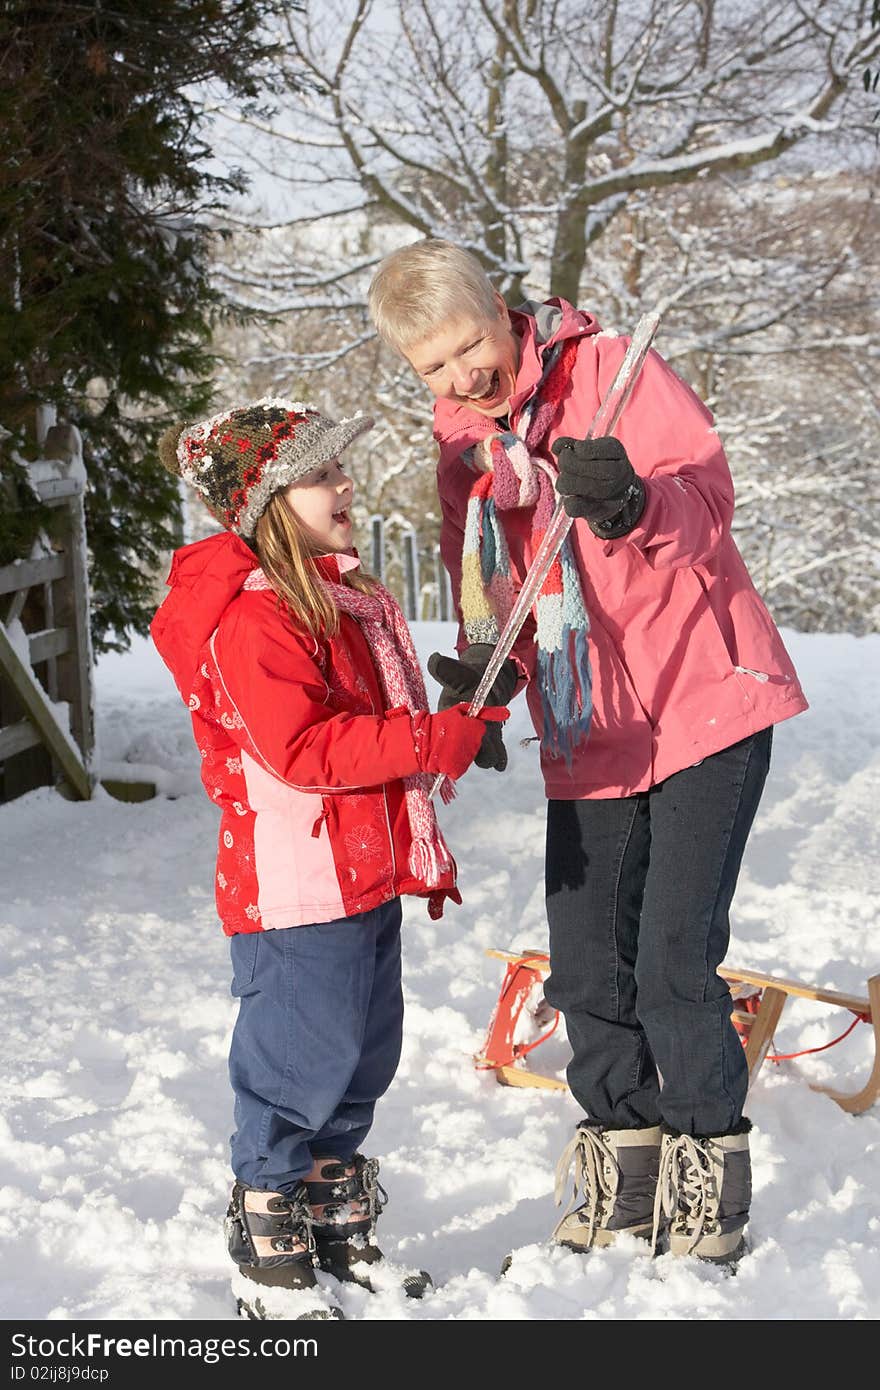 Young Girl Showing Grandmother Icicle In Snowy Landscape Having Fun